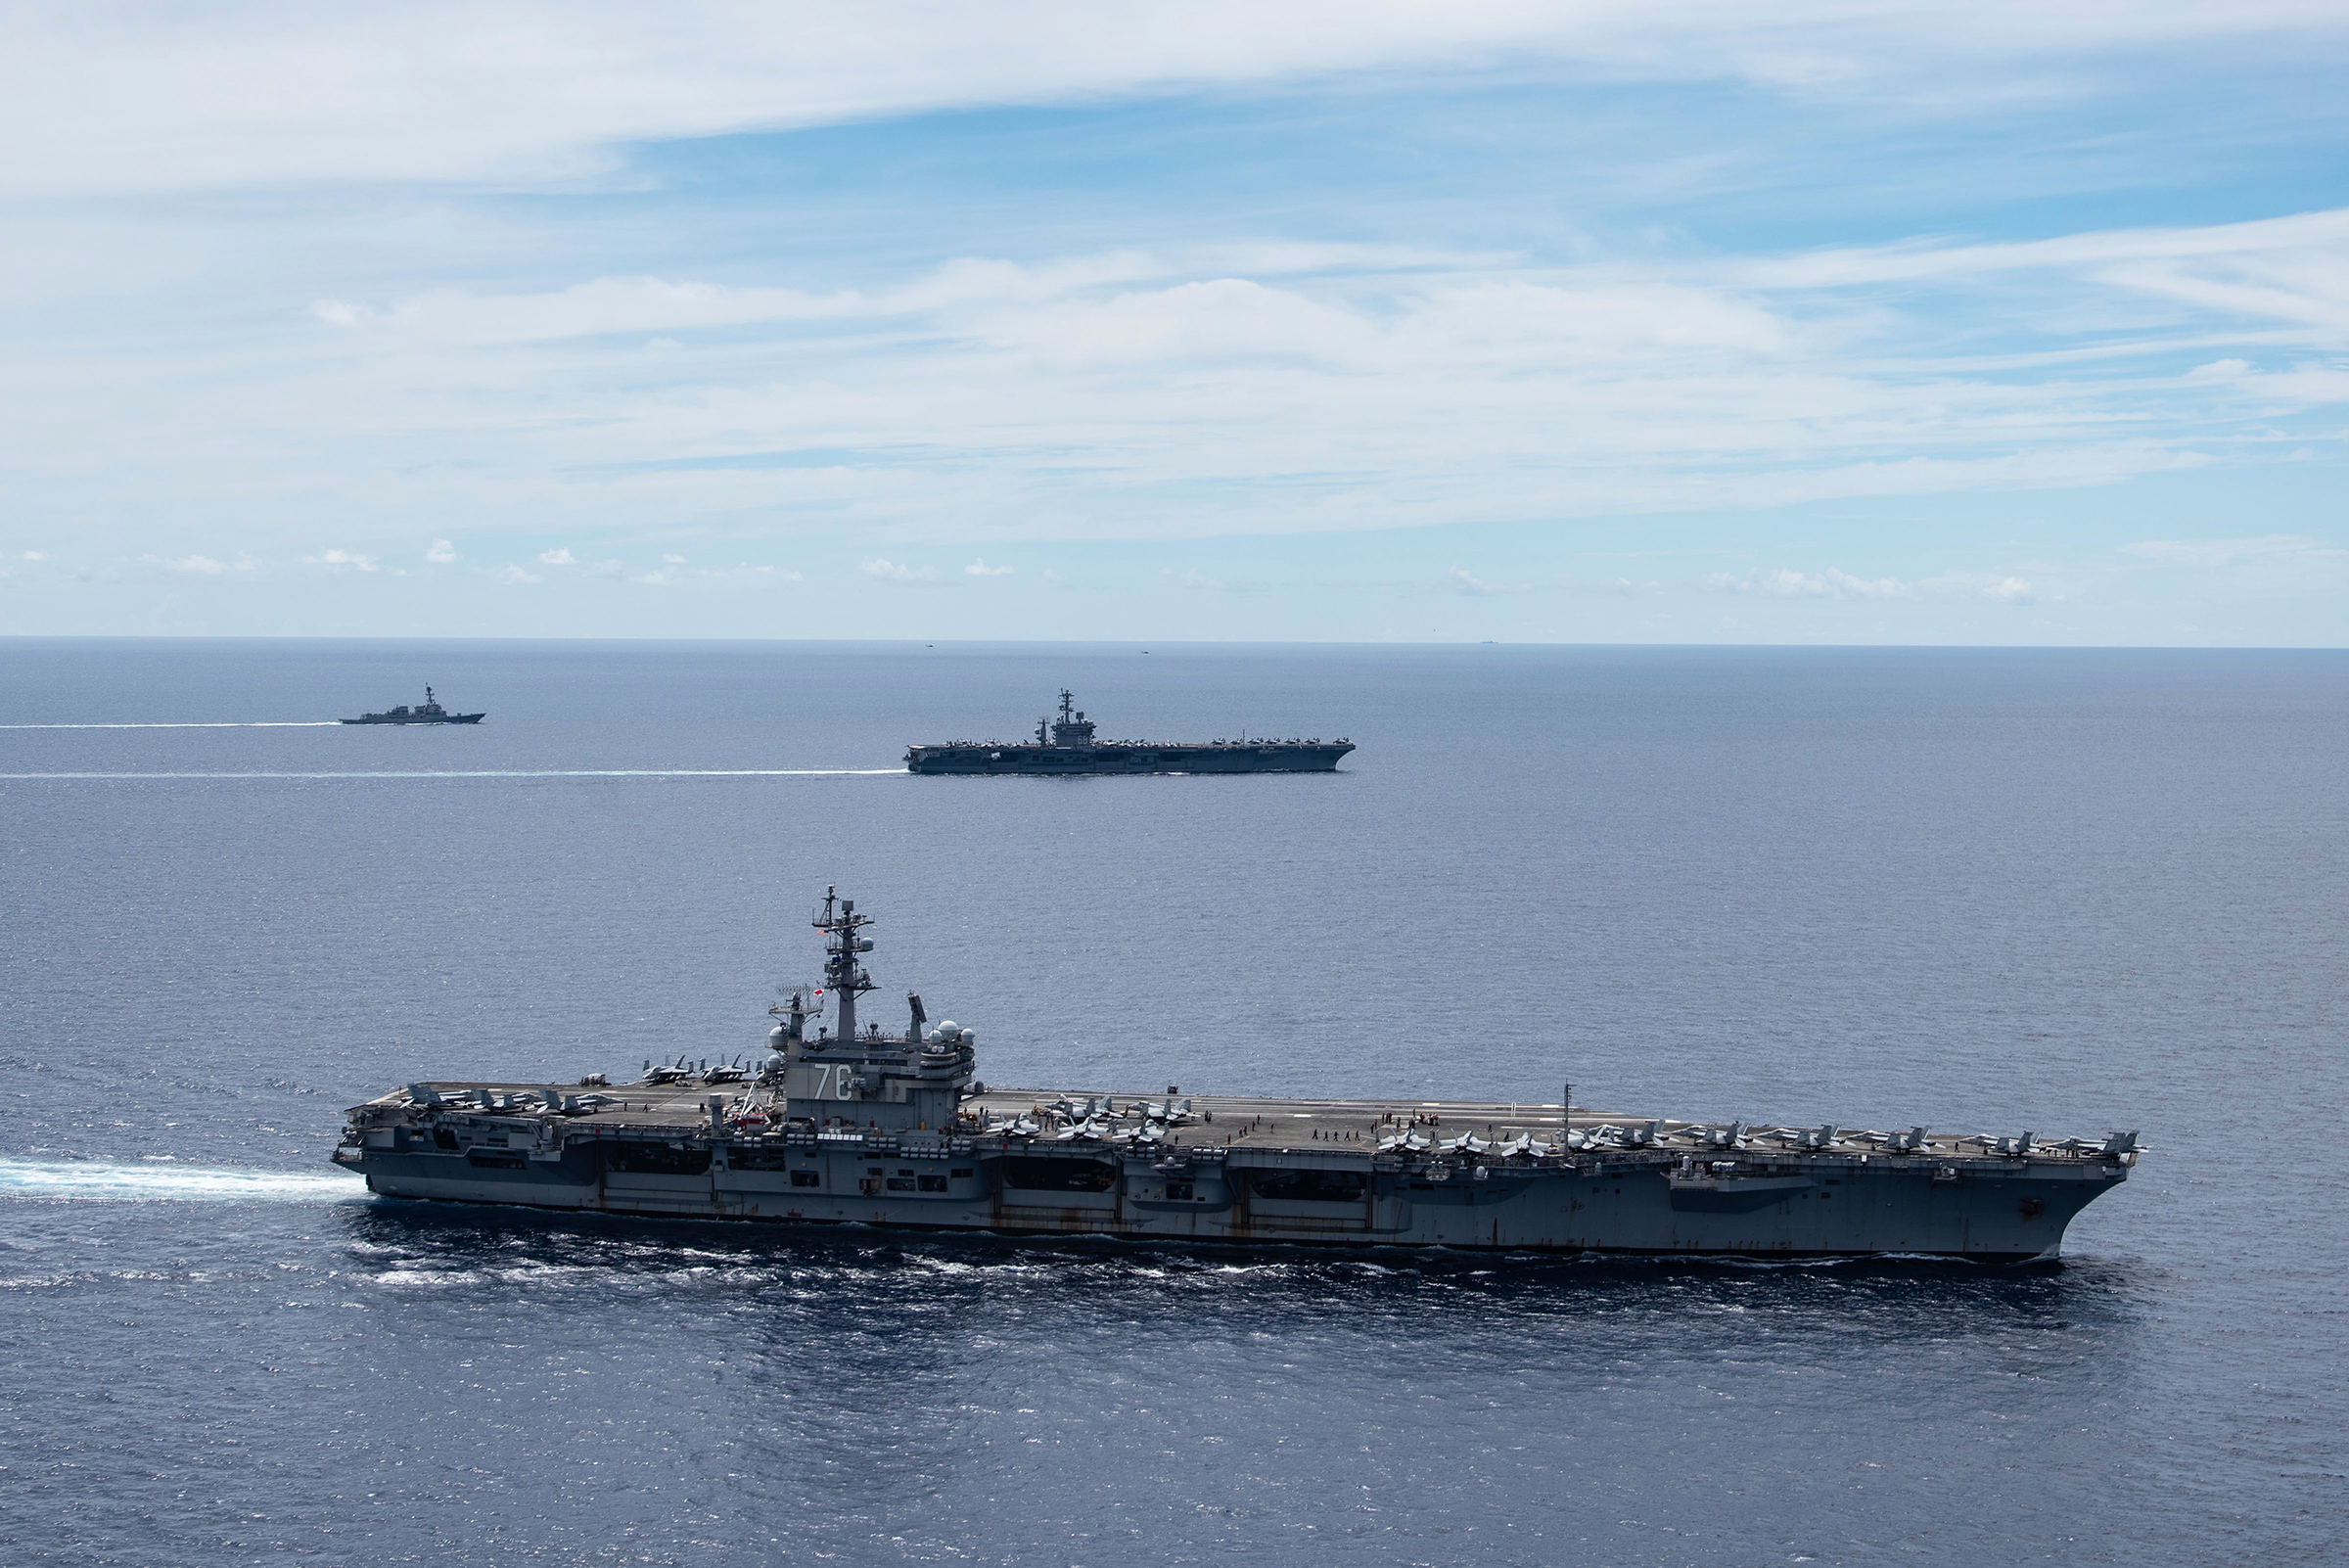 In this July 6, 2020, photo provided by the U.S. Navy, the USS Ronald Reagan (CVN 76, front) and USS Nimitz (CVN 68, rear) Carrier Strike Groups sail together in formation, in the South China Sea (Mass Communication Specialist 3rd Class Jason Tarleton—U.S. Navy/AP)